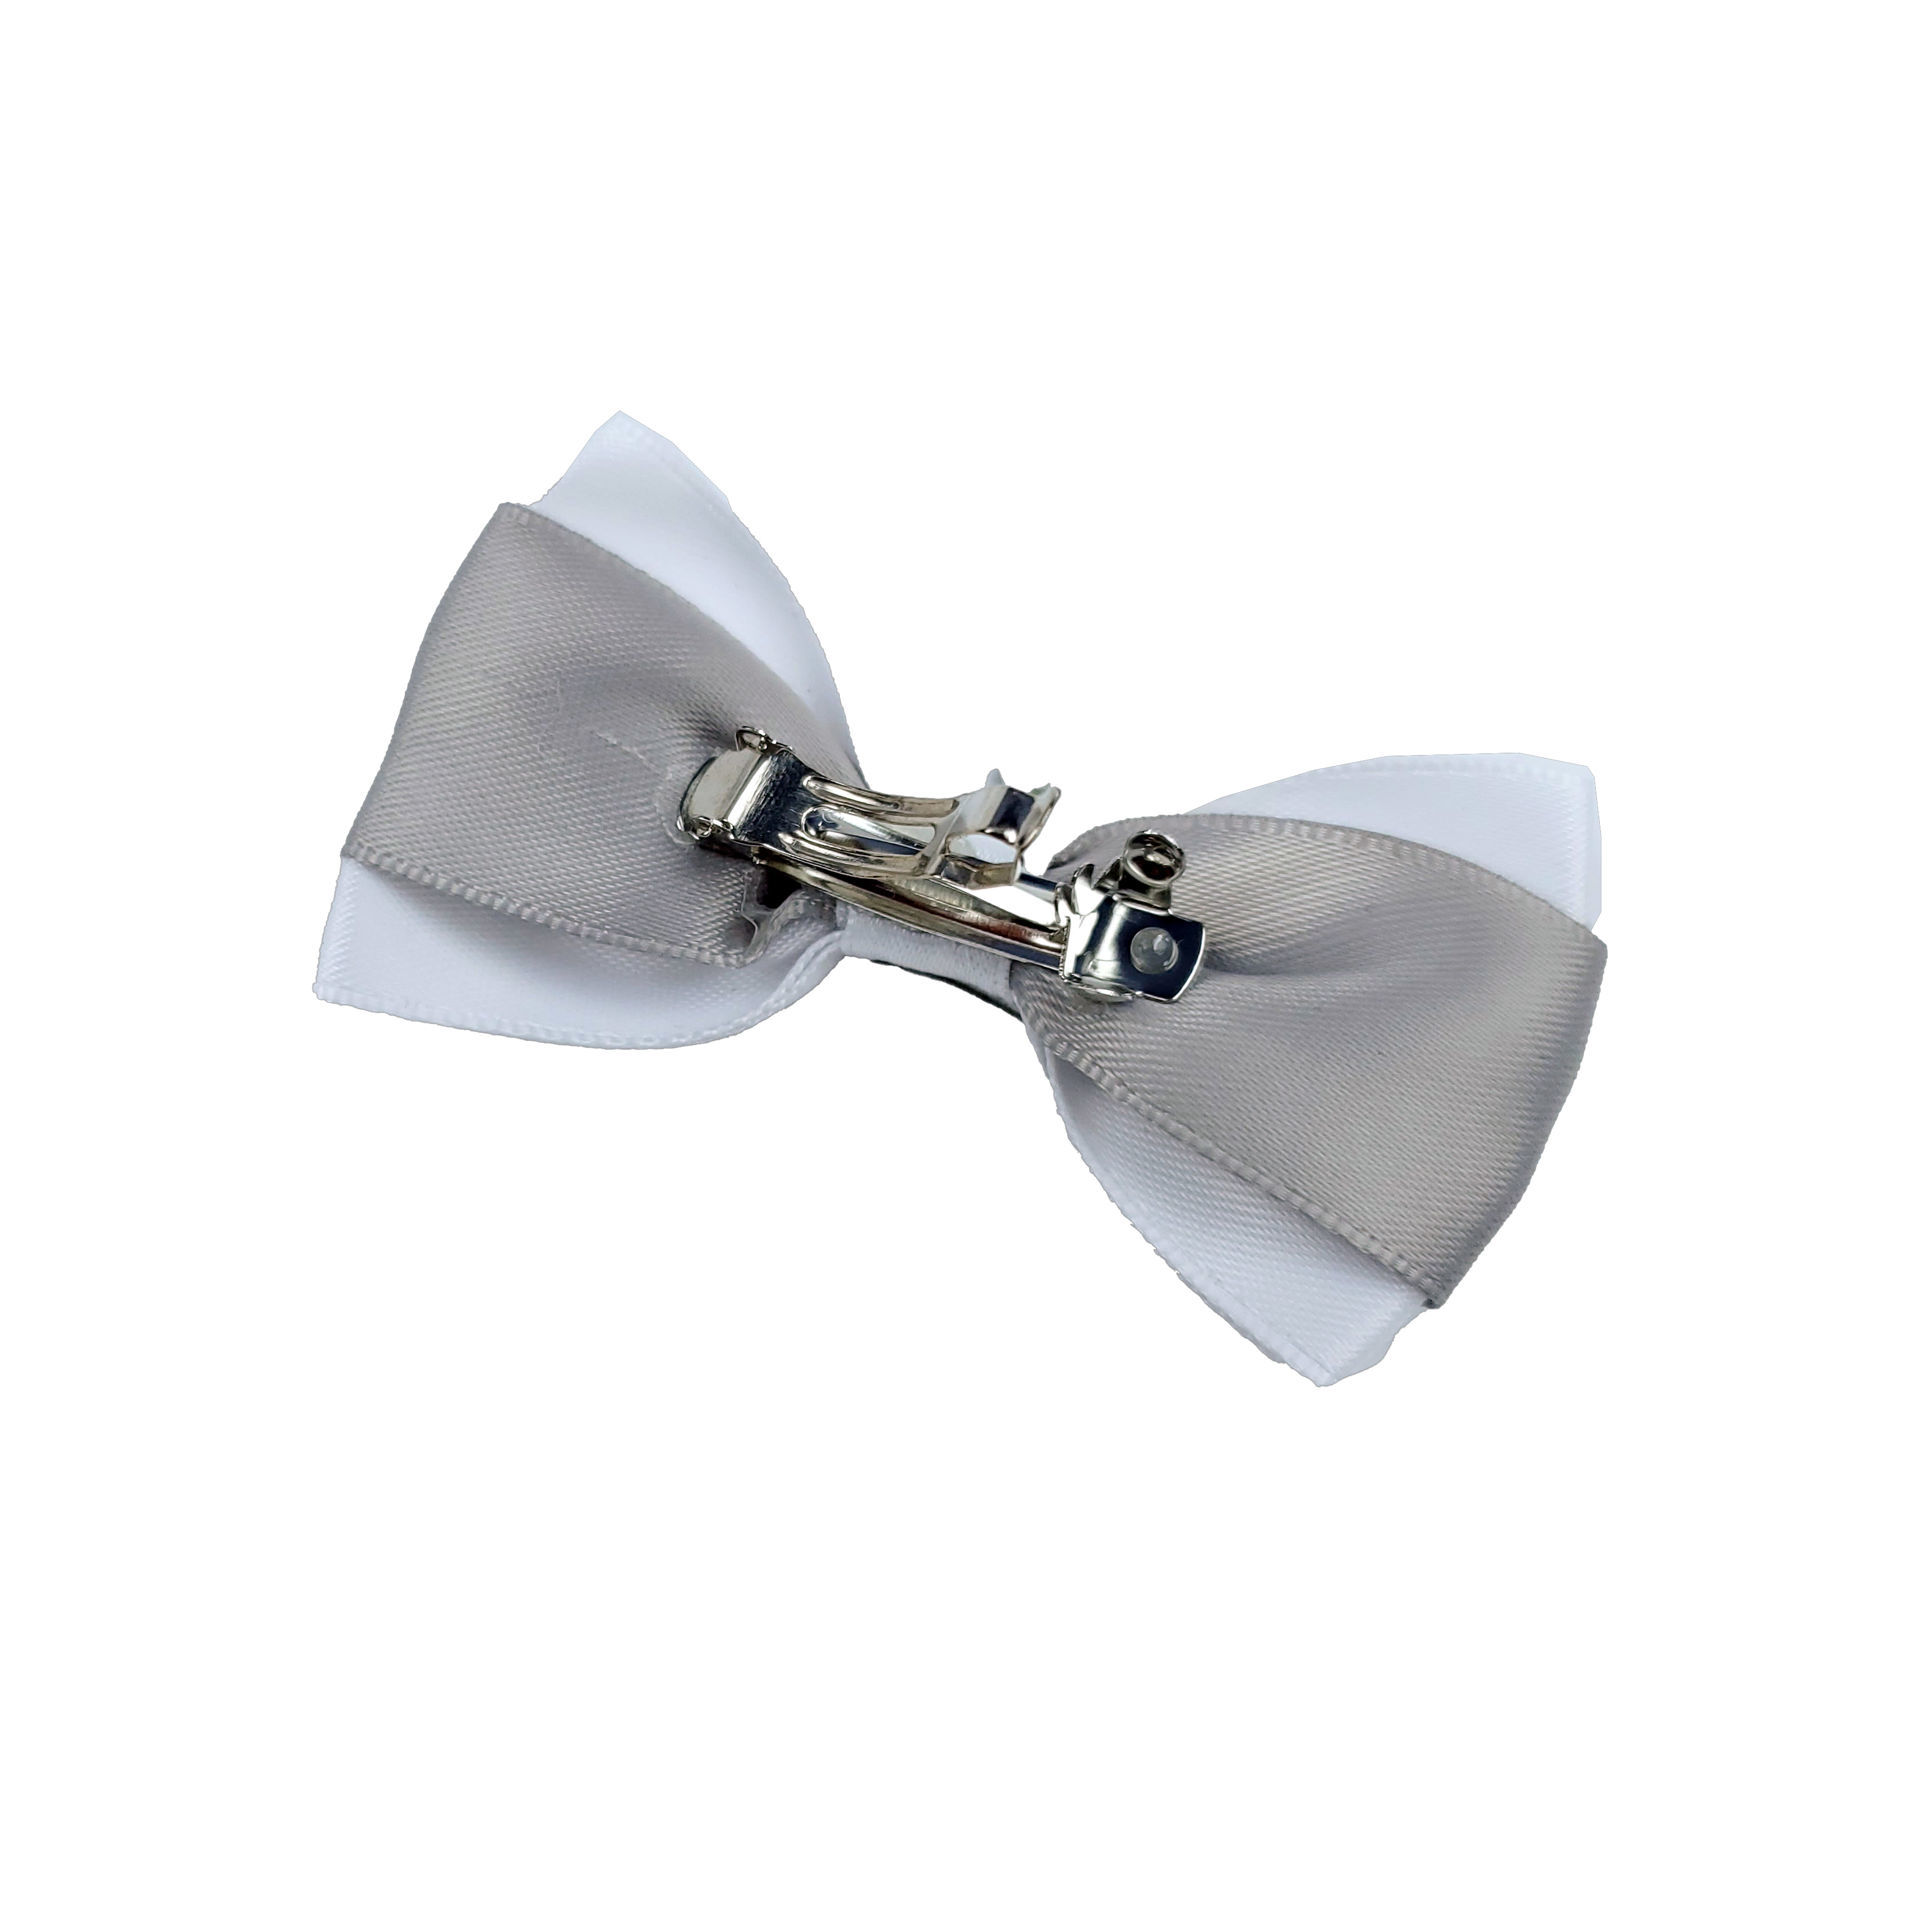 Picture of Hair Bows - Sm Silver Tiara